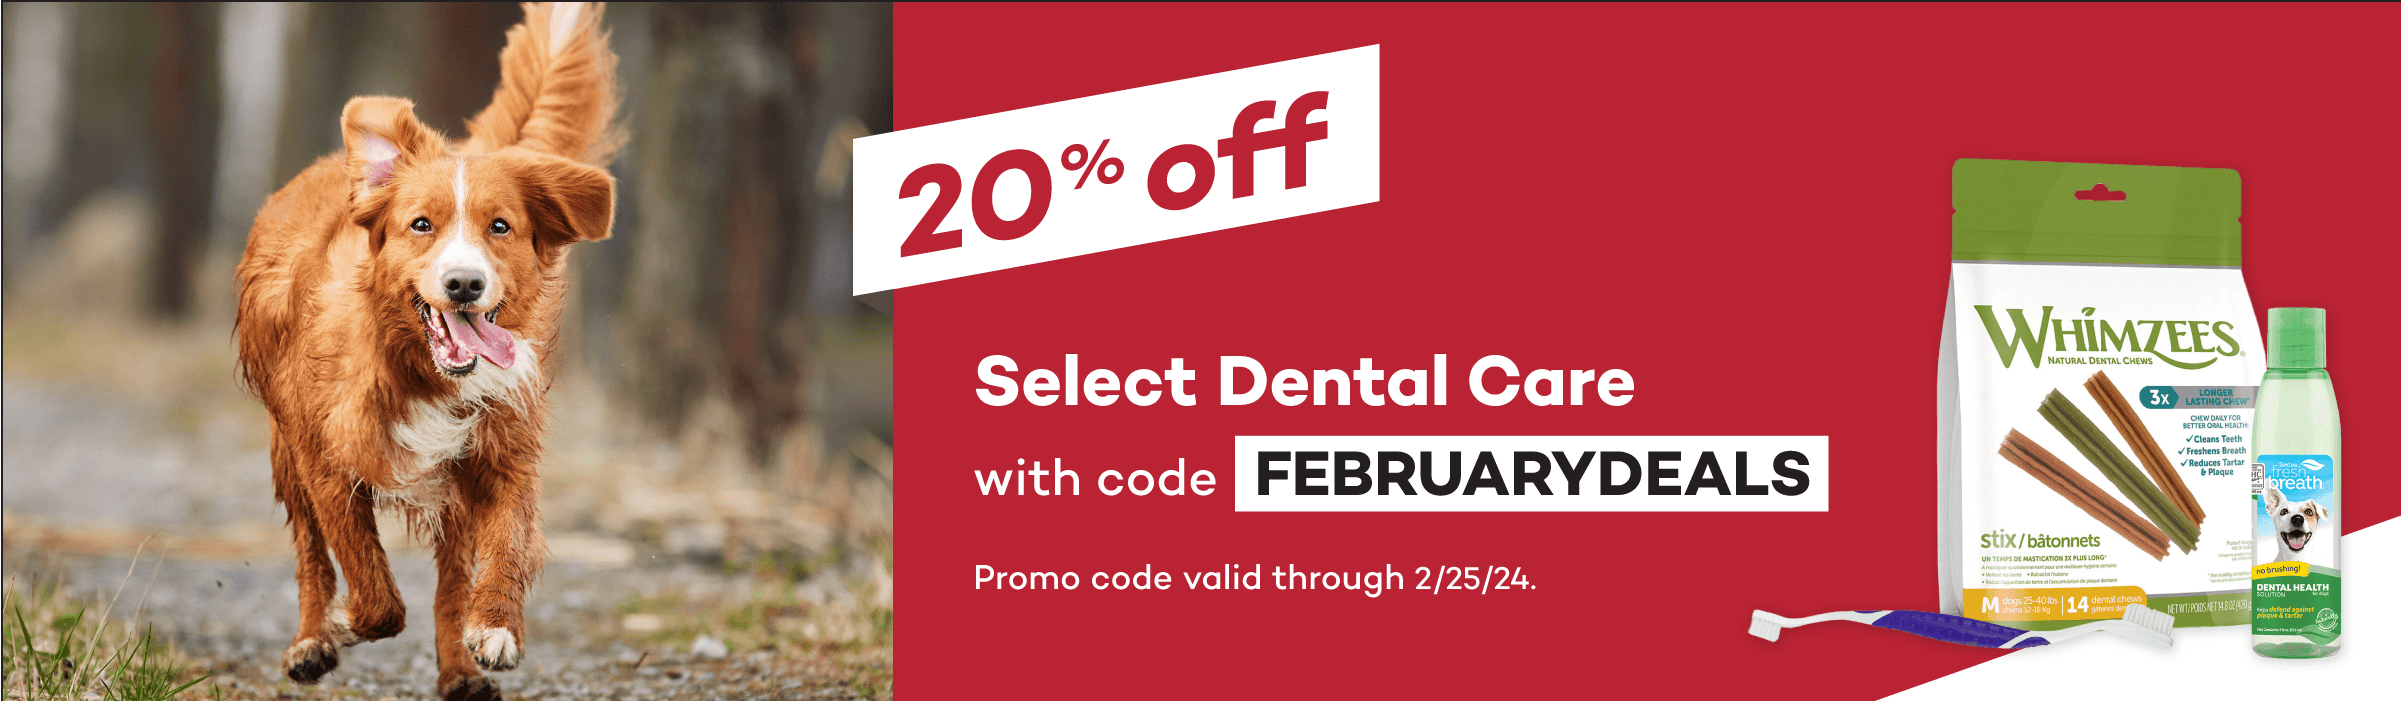 20% off Select Dental Care with code FEBRUARYDEALS. Promo code valid through 2/25/24